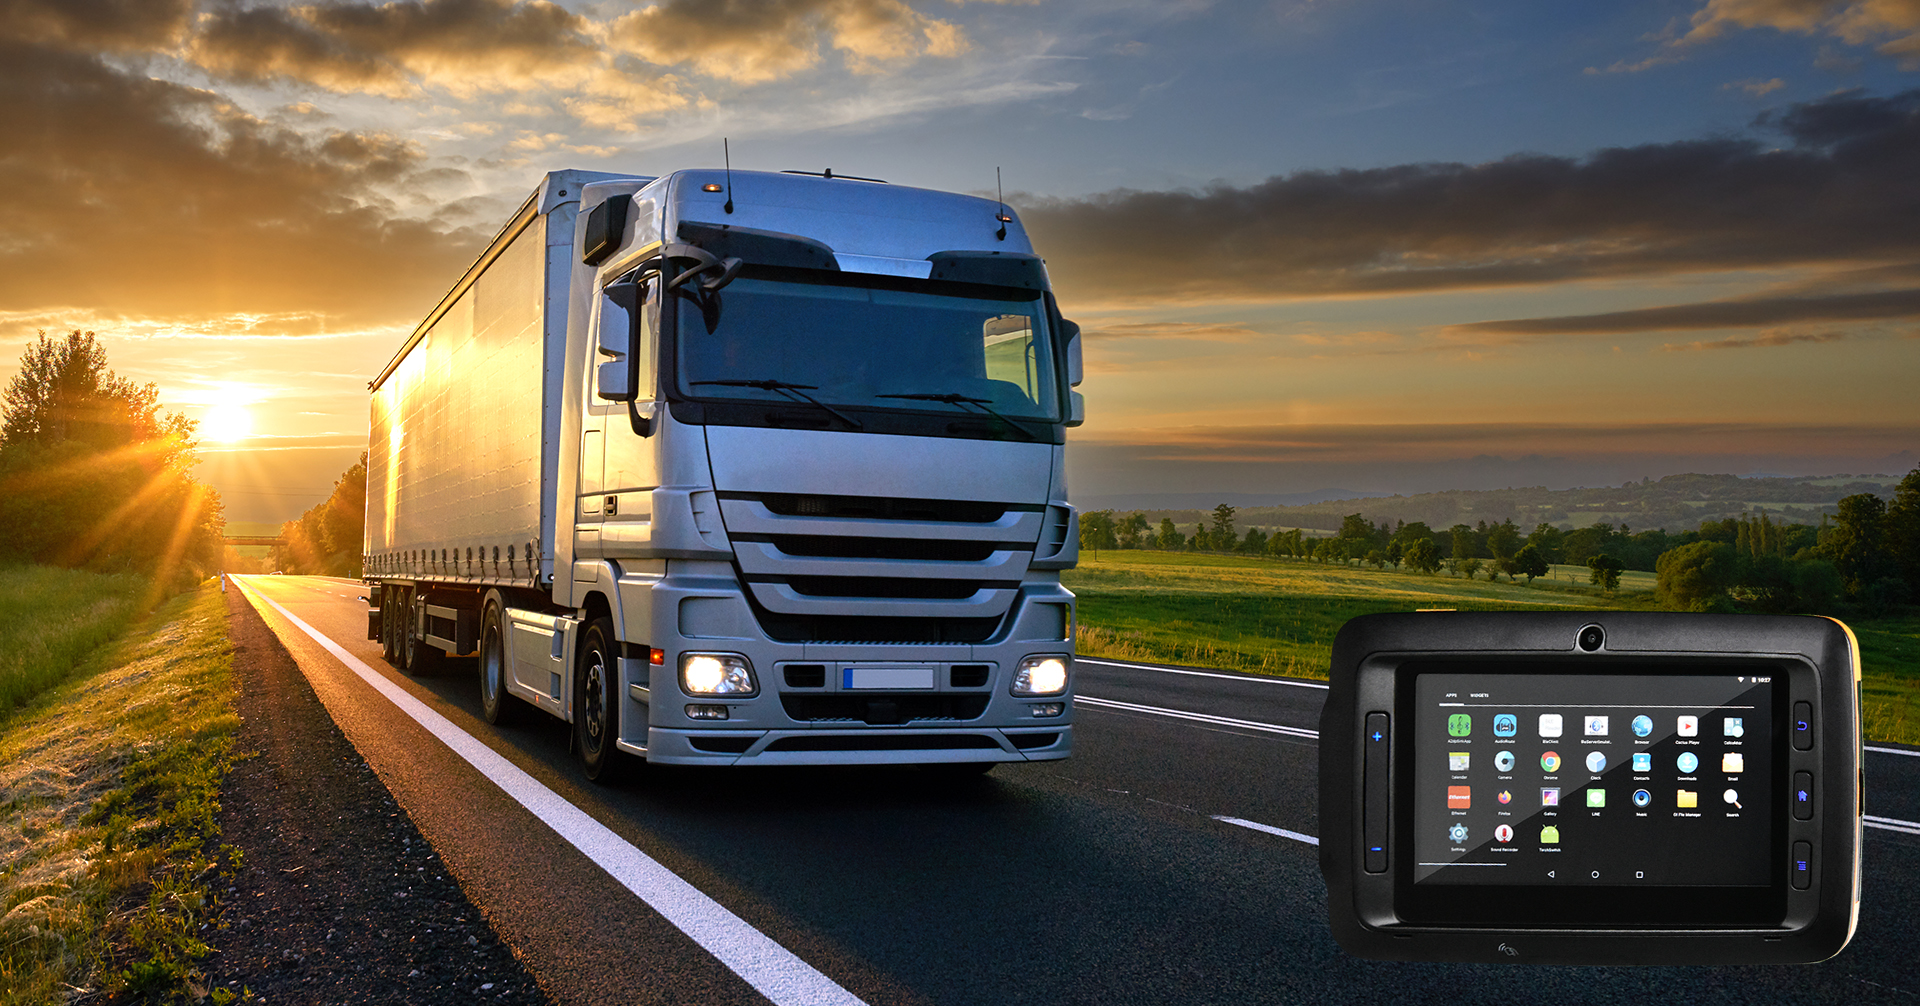 FIC provides the certified tablet for vehicle regulation management